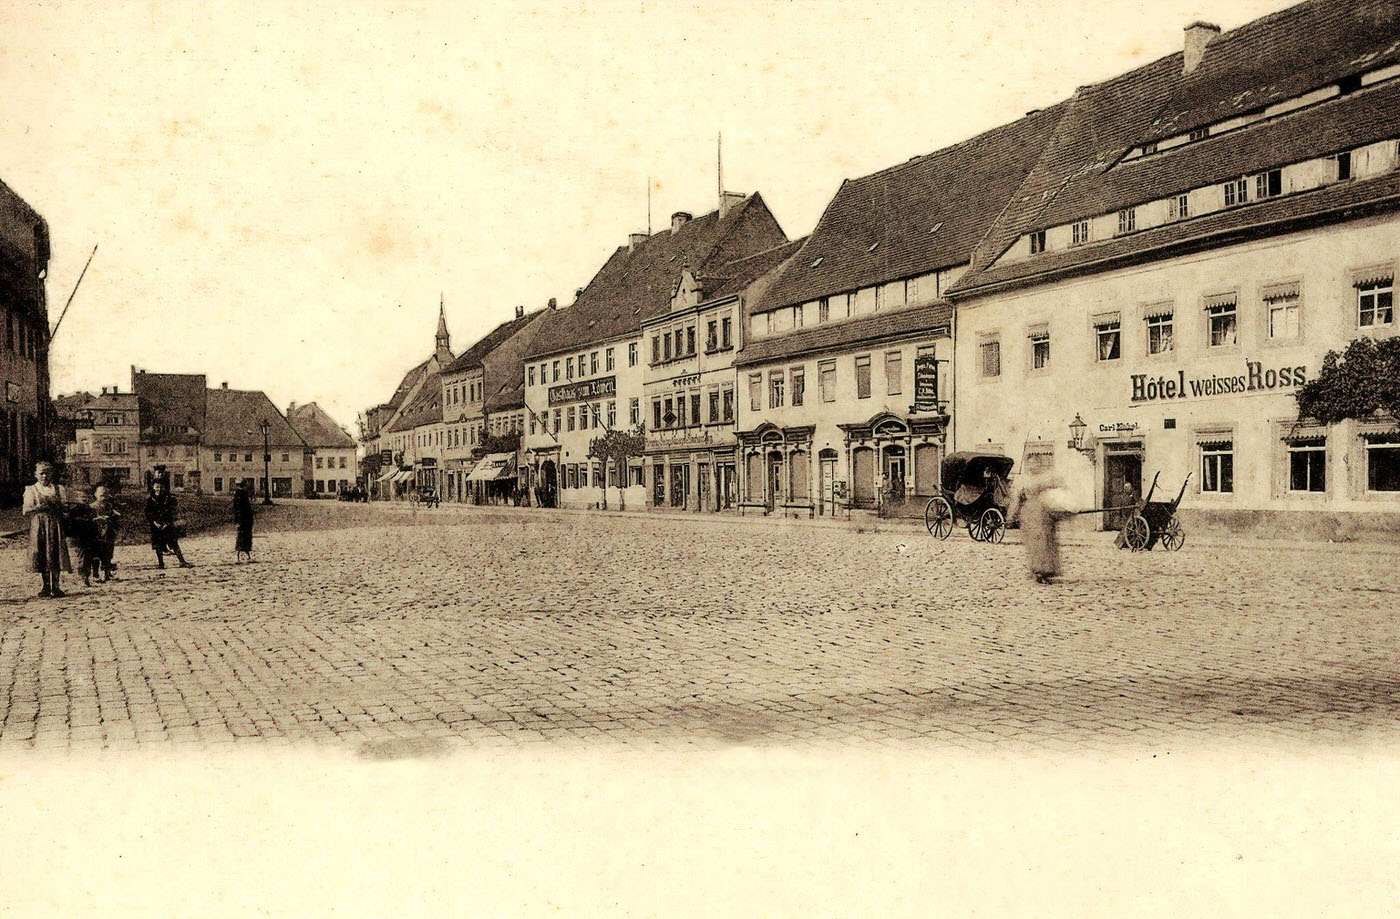 Altmarkt, Oschatz, Horse-drawn carriages, Hotels, Shops in Saxony, Germany, 1898.